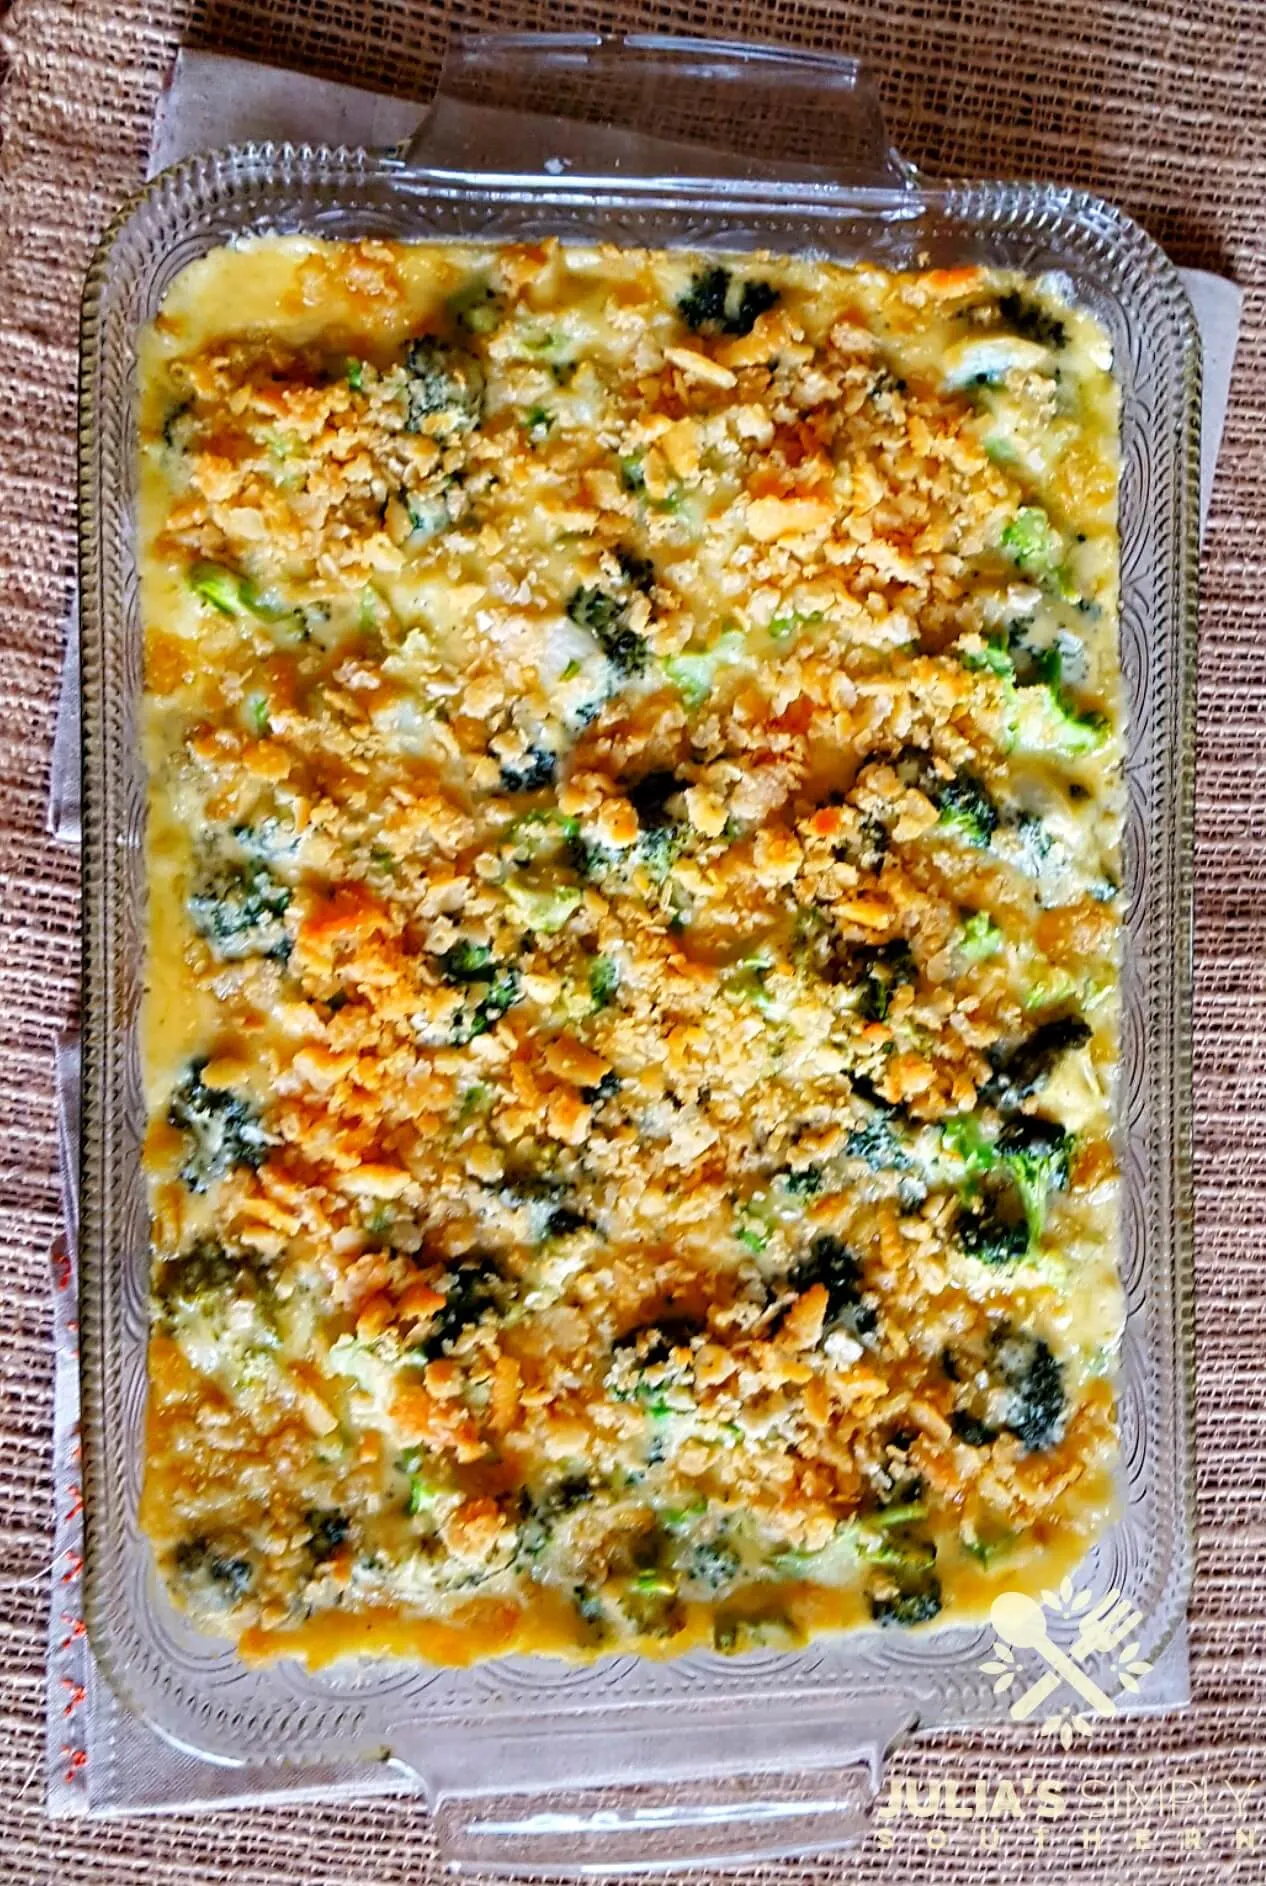 Easy broccoli and cheese baked side dish